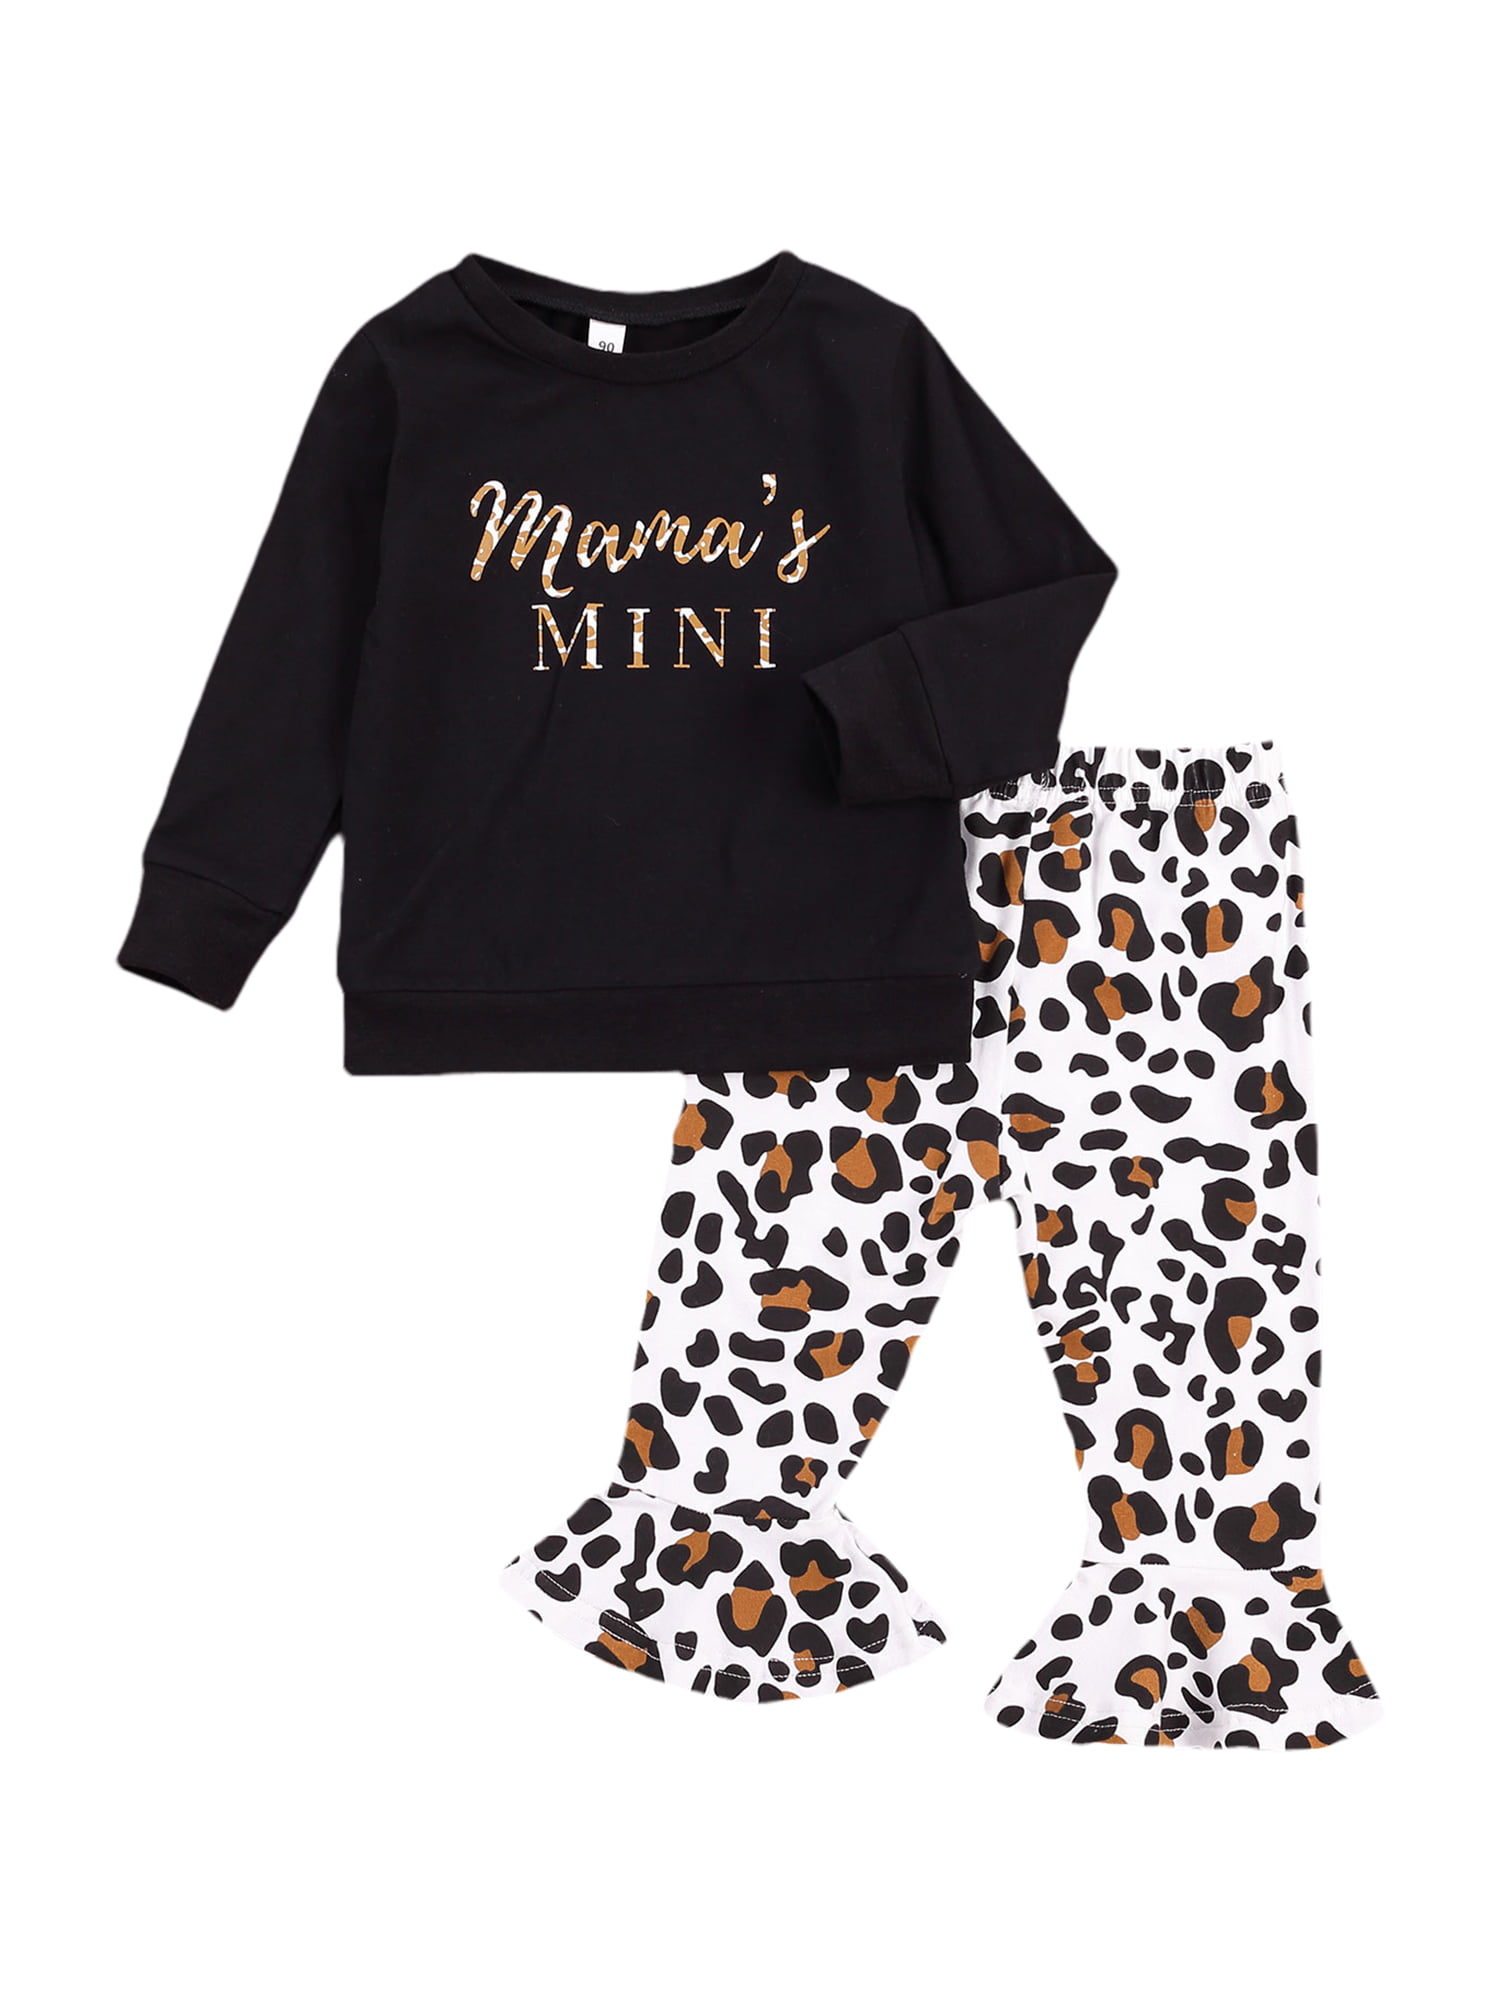 Toddler Boy Kids Letter Clothes 2PC Long Sleeve T-shirt+Pant Casual Outfit Set 9 